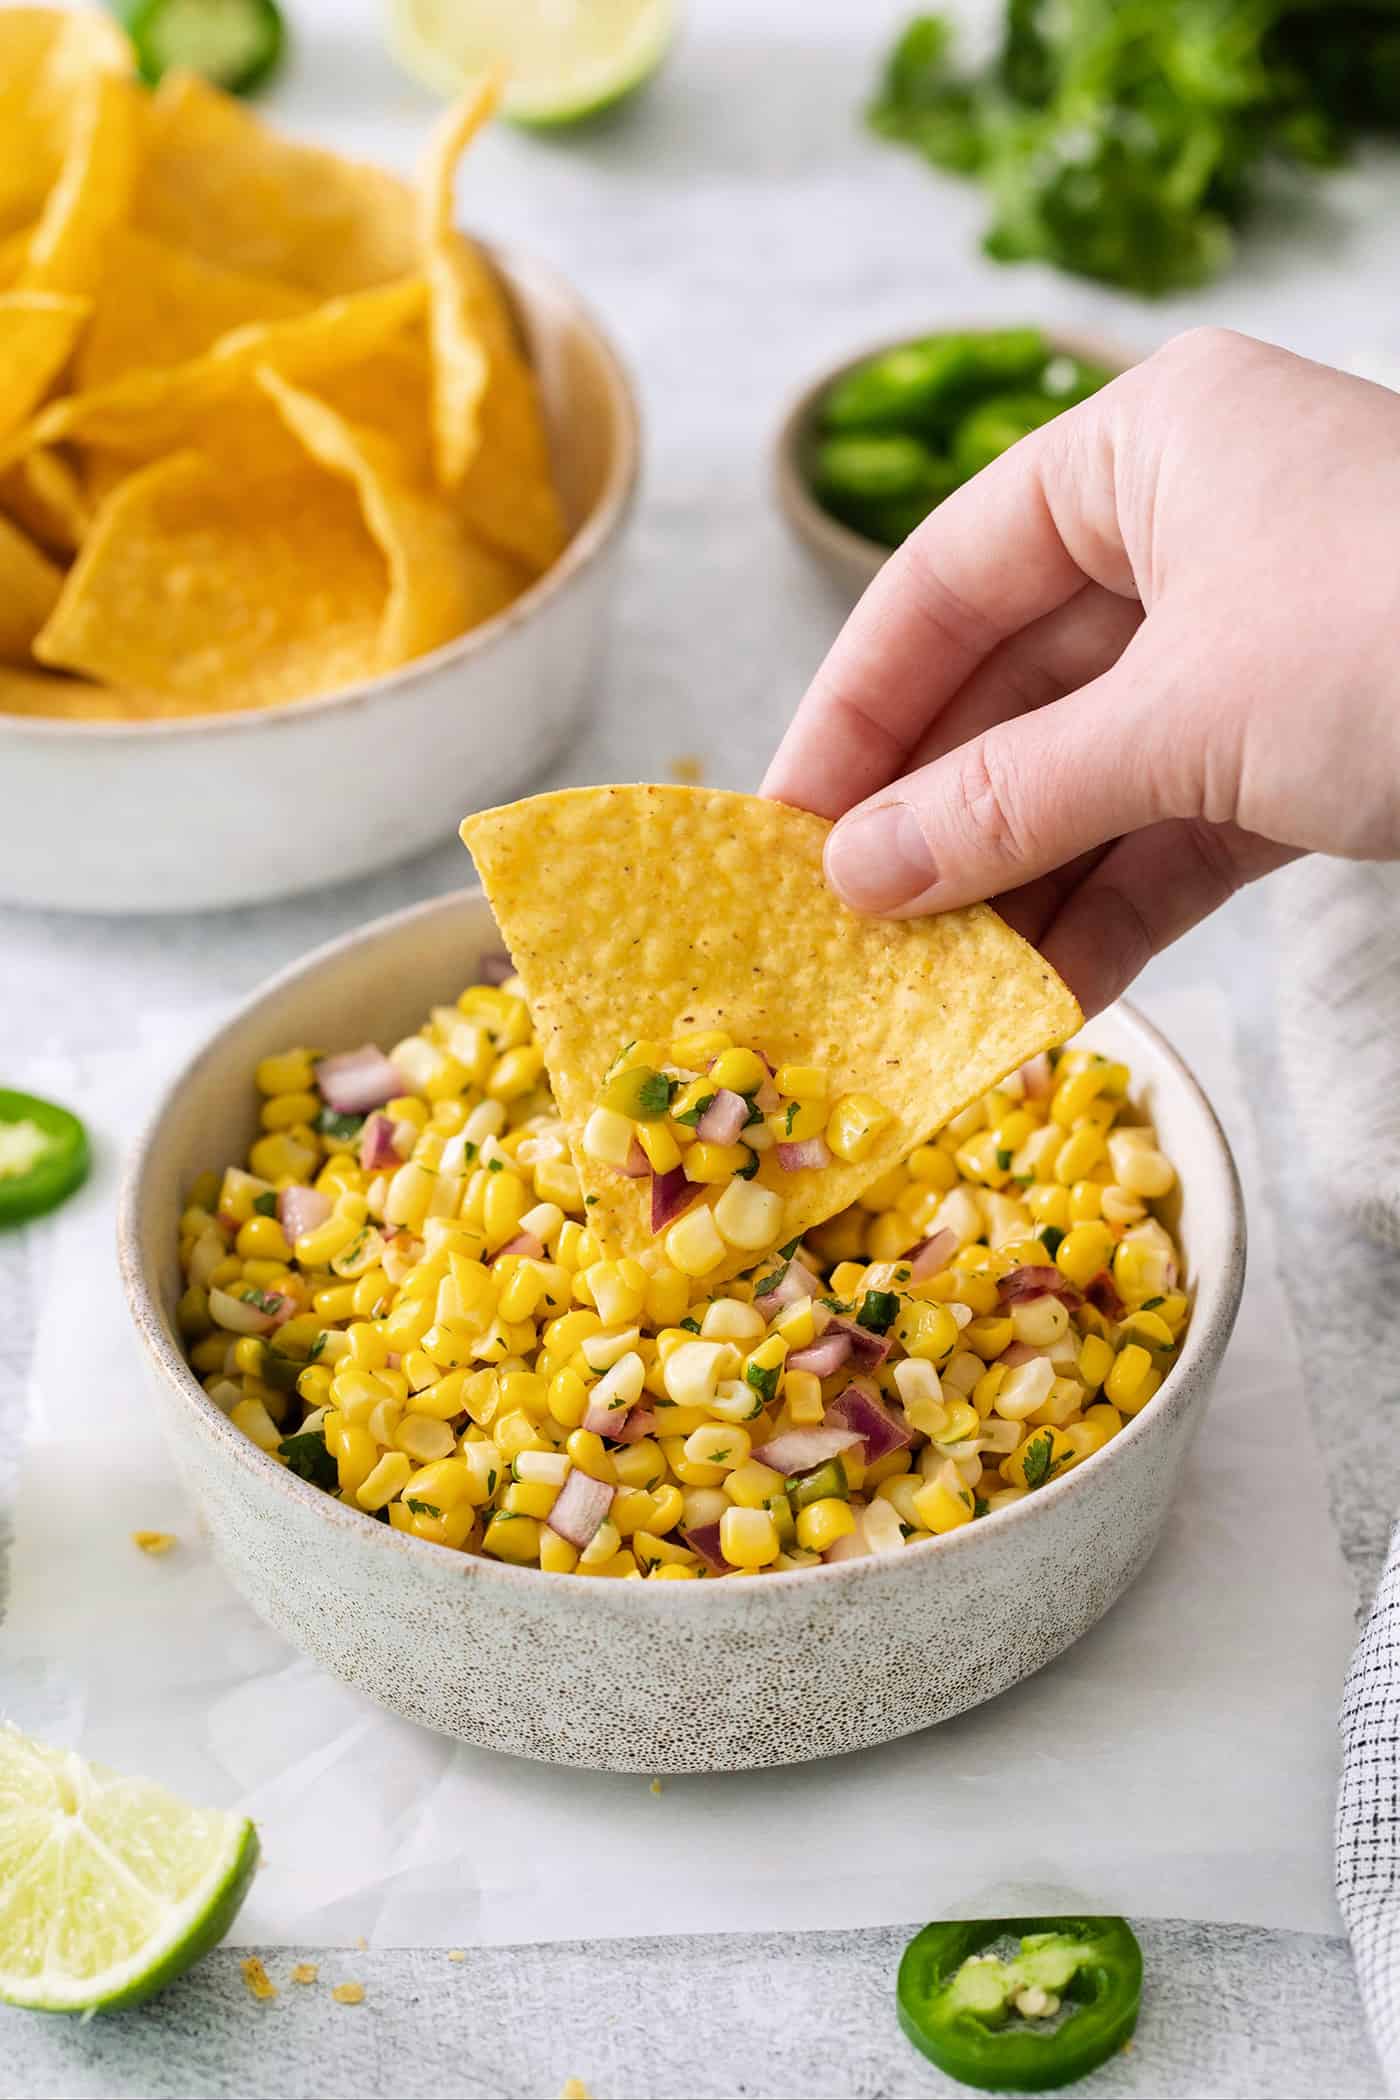 A hand using a tortilla to scoop up roasted chili corn salsa